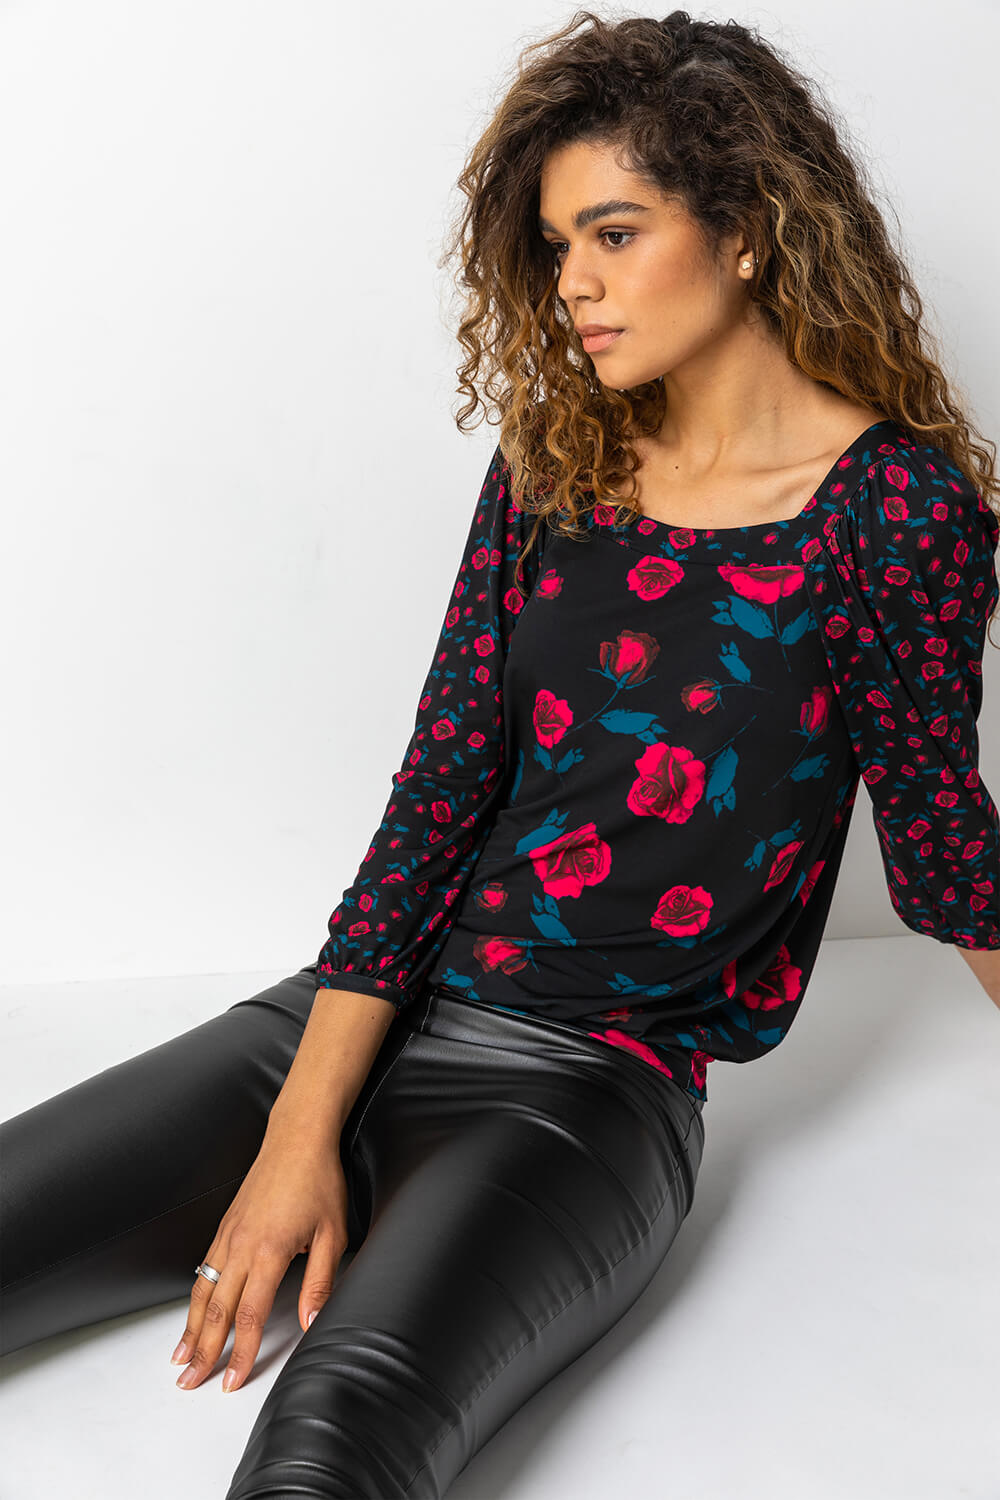 PINK Contrast Floral Print Square Neck Top, Image 5 of 5